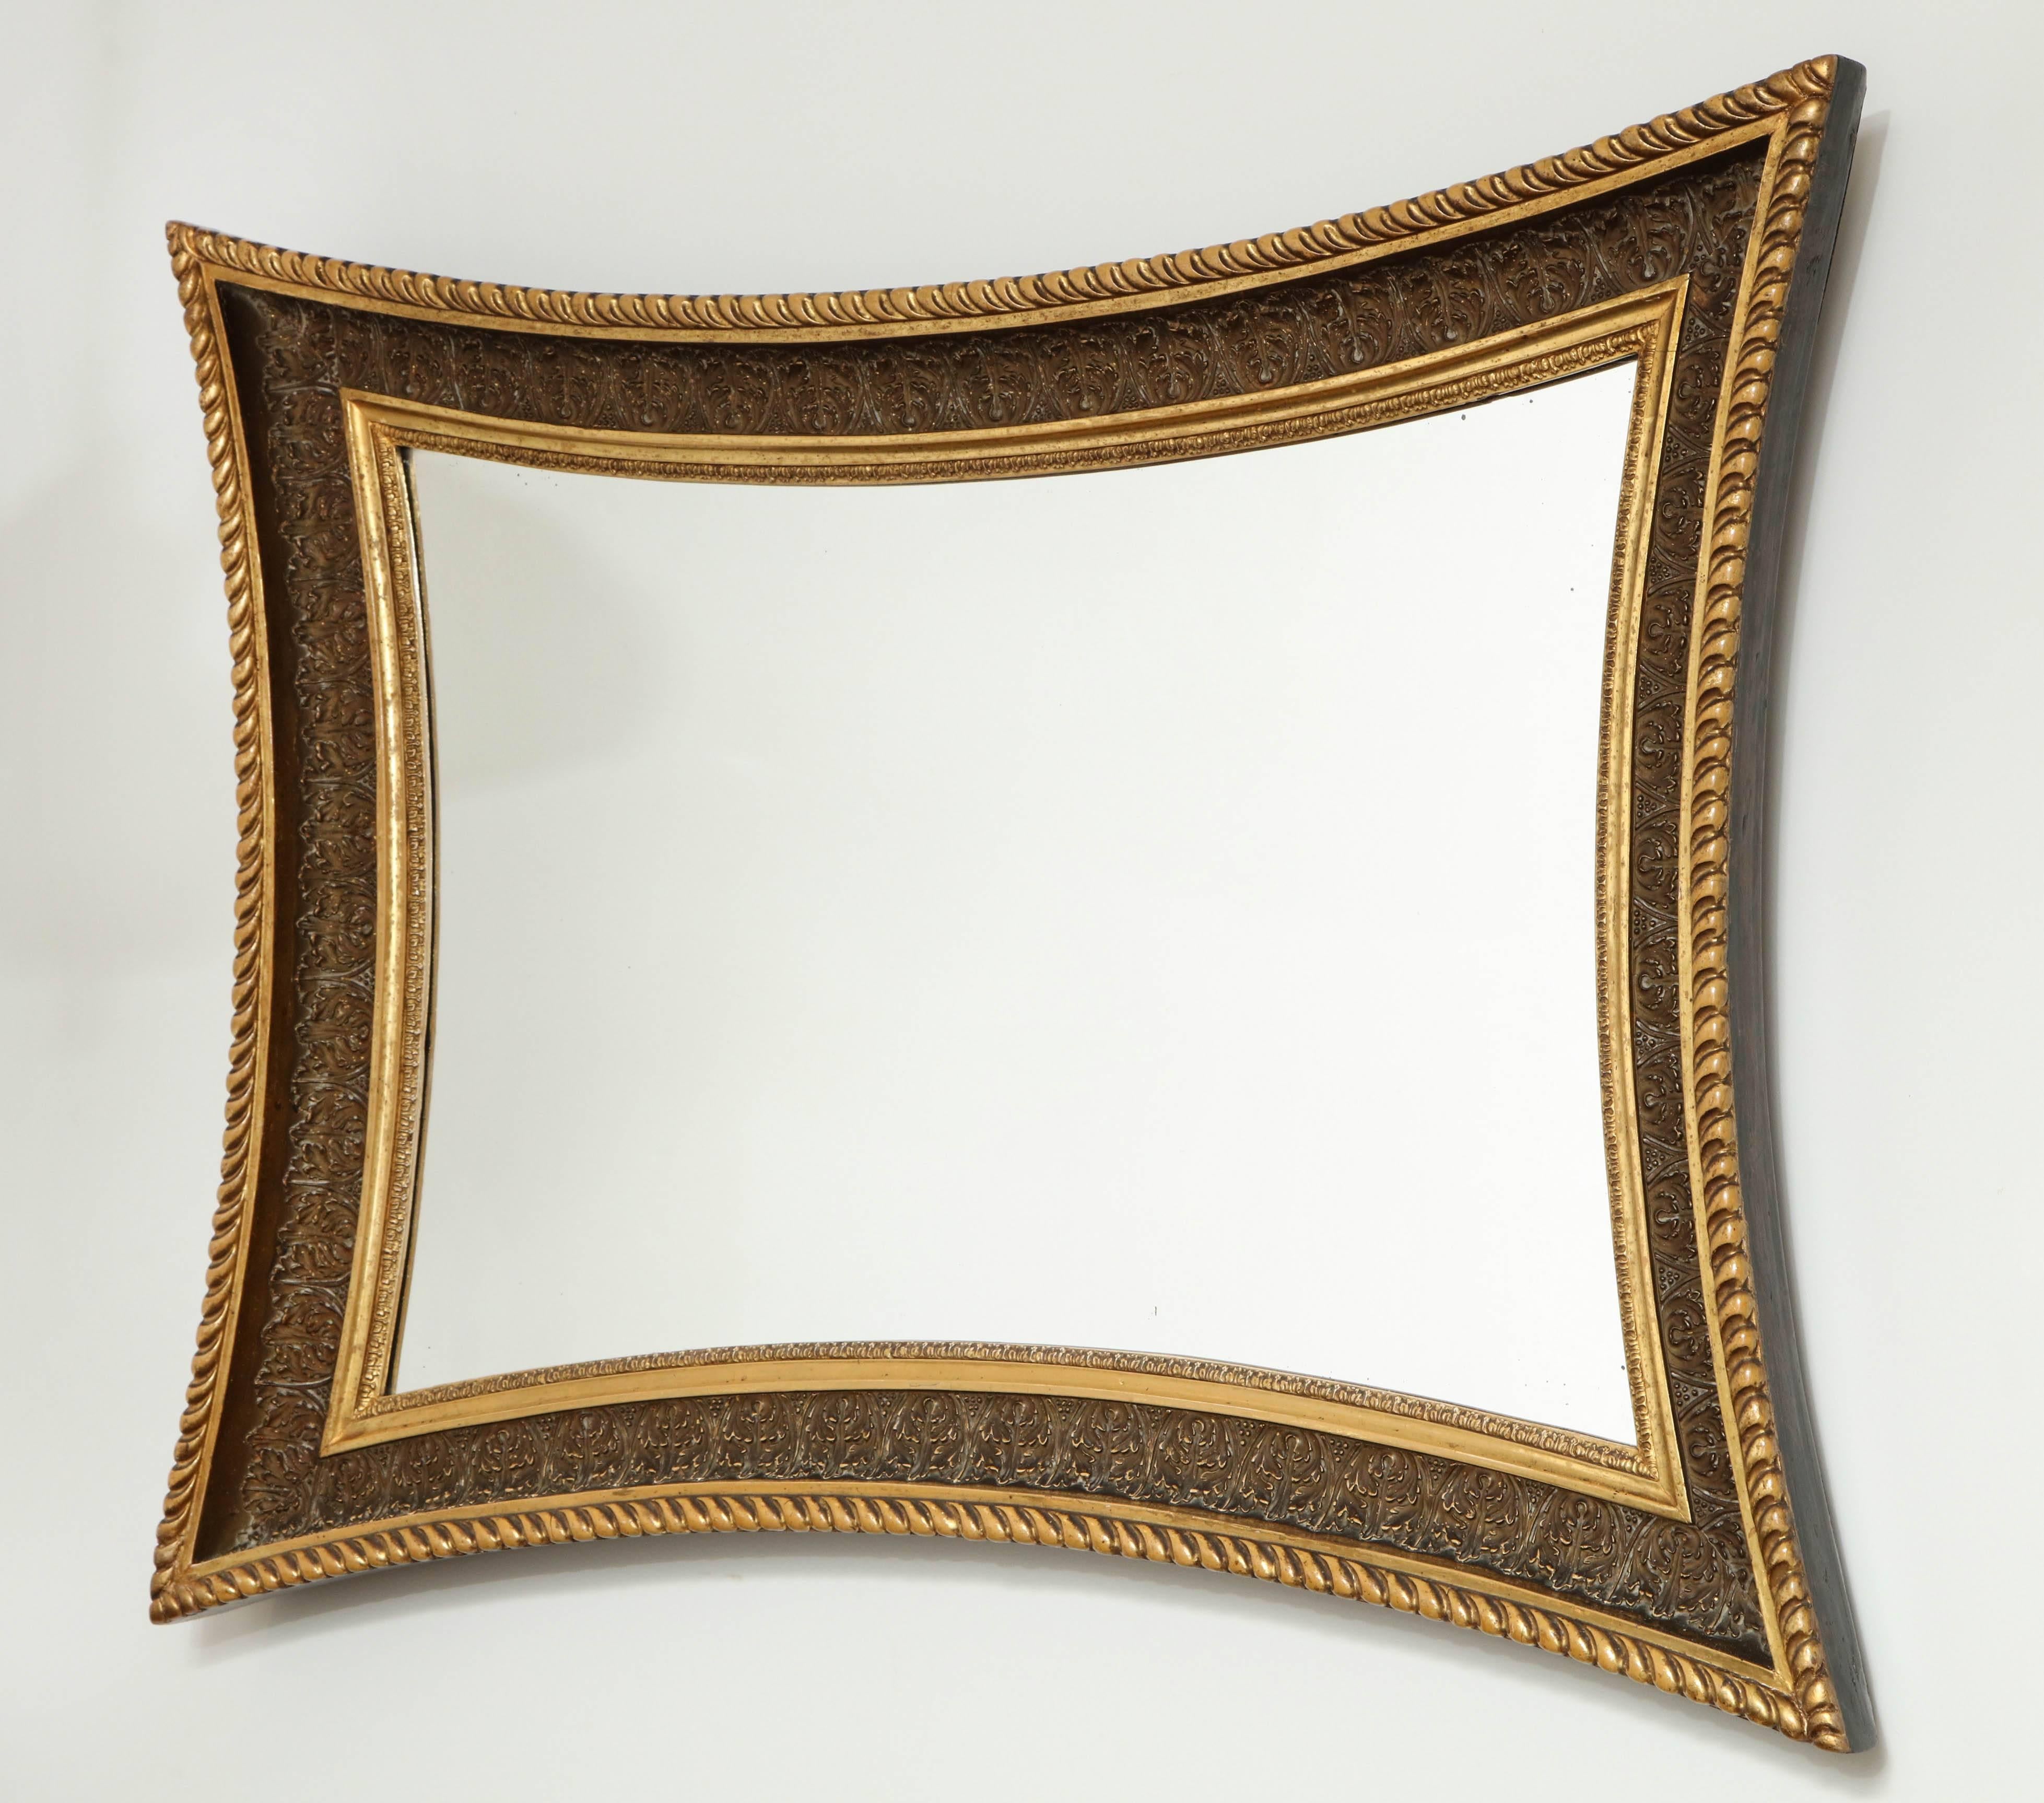 A Danish giltwood and painted mirror, circa 1860s, the concave frame with a gadrooned outer edge, painted leaf cast cove section and a foliate tip inner edge. Original surface with a lovely patina, old mirror glass.